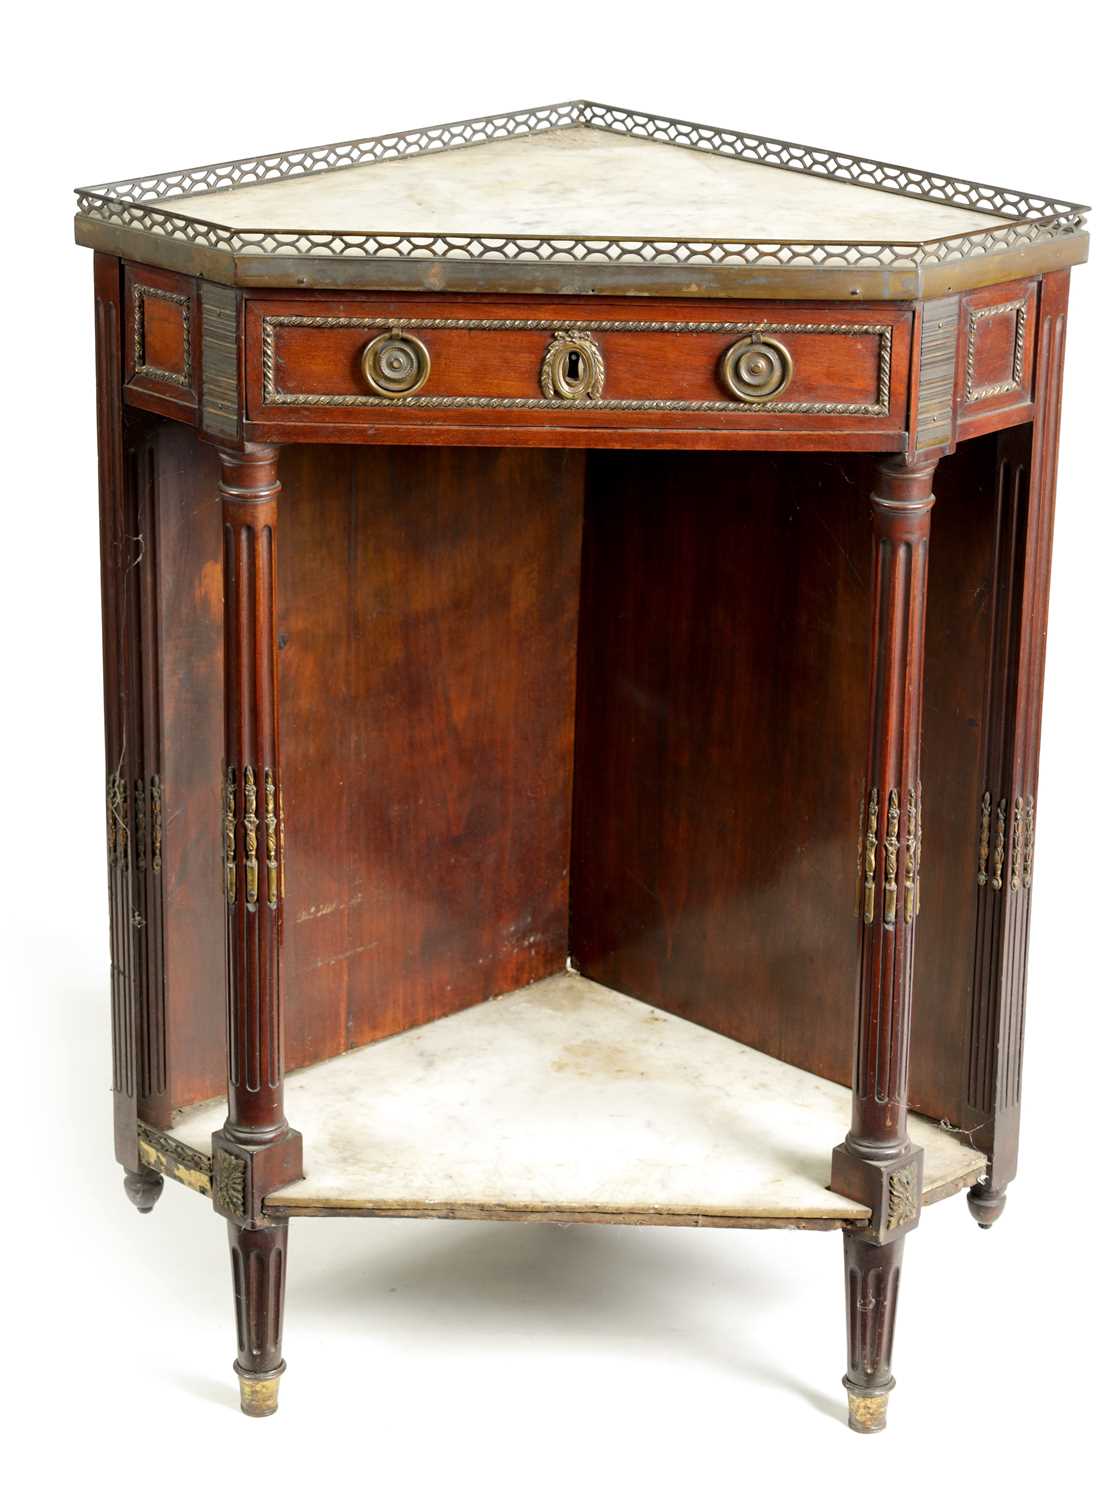 AN EARLY 19TH CENTURY FRENCH MAHOGANY AND WHITE MARBLE ORMOLU MOUNTED CORNER TABLE